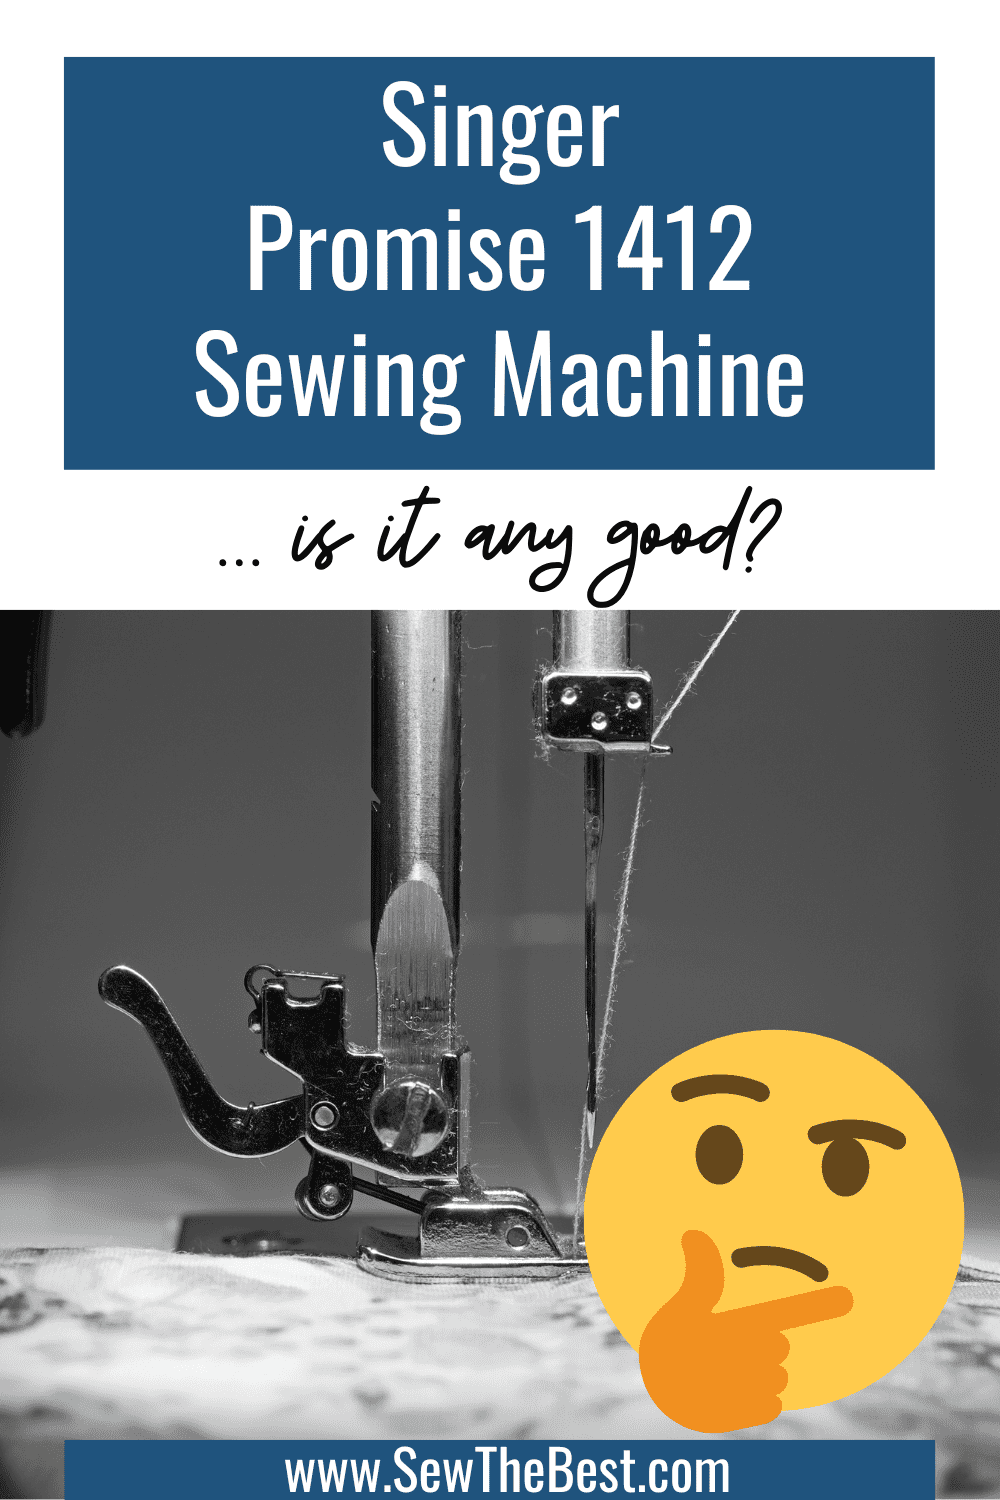 Singer Promise 1412 Sewing Machine ... is it any good? Picture of sewing head and thinking face emoji follows.